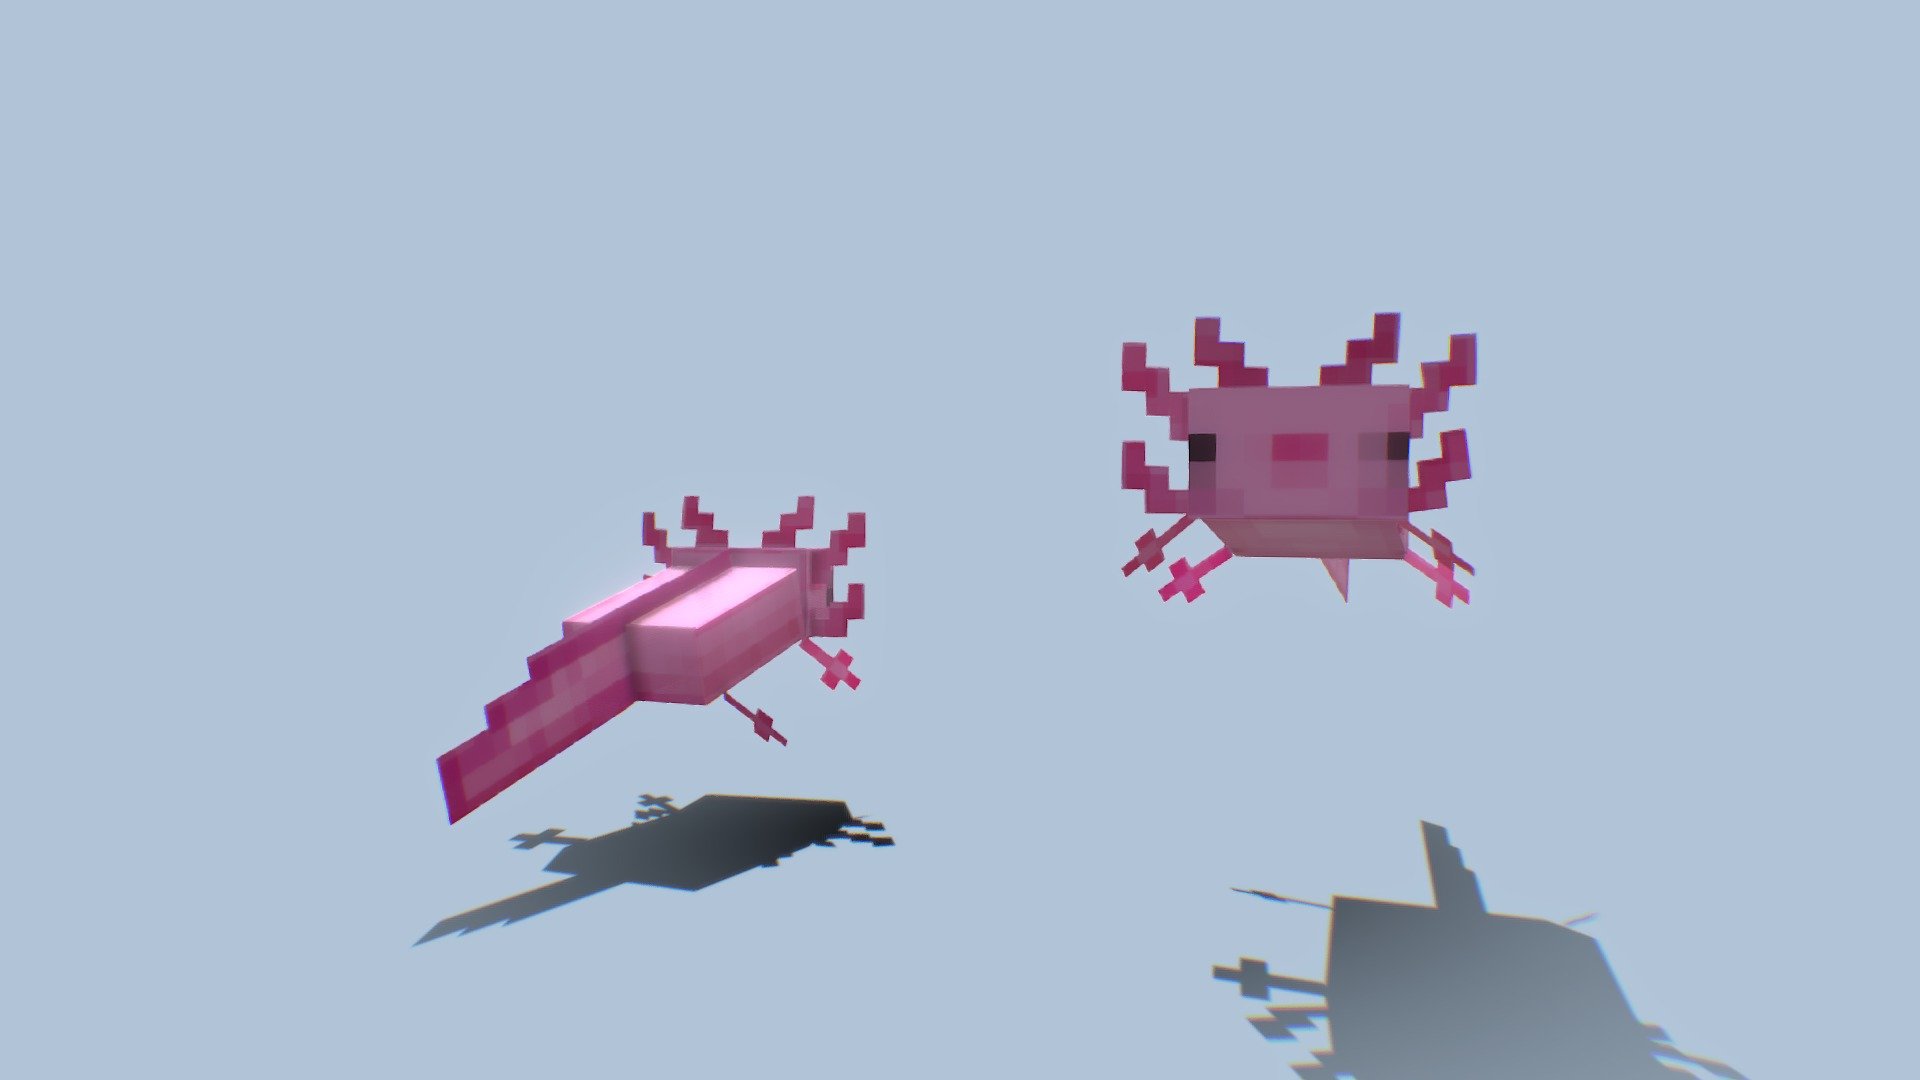 Minecraft Axolotl - Download Free 3D model by earthenticbotha